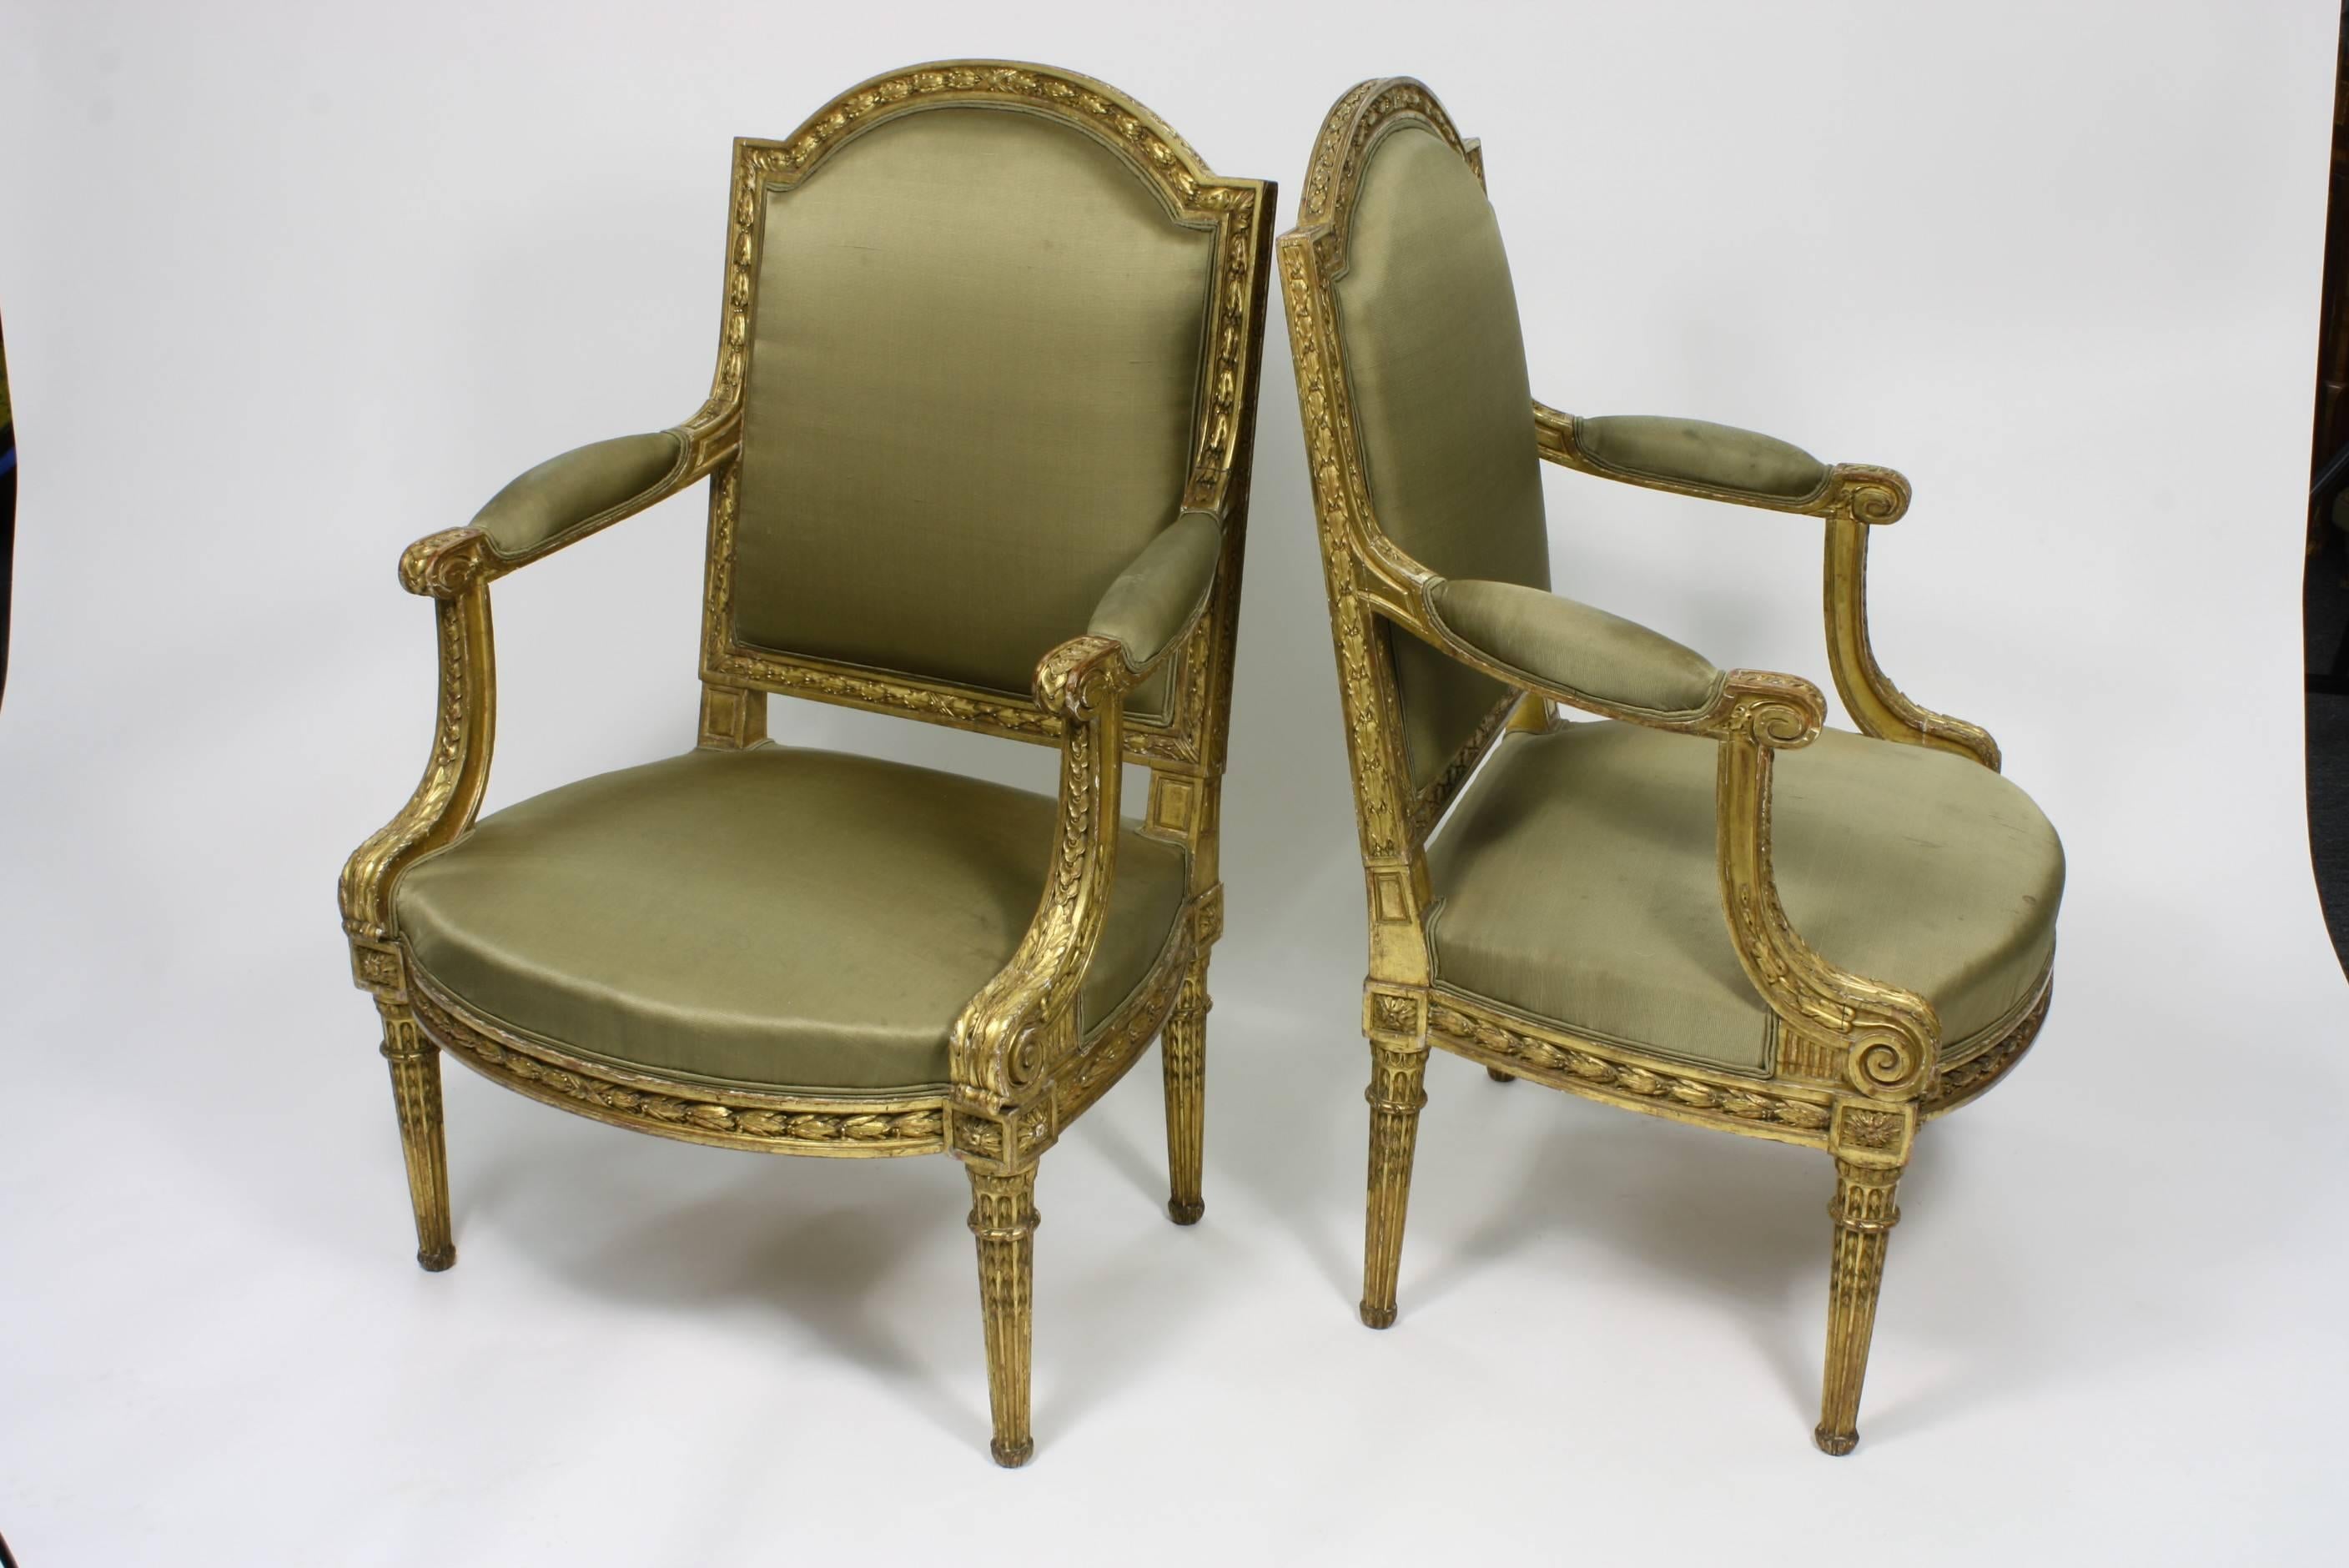 Carved Pair of Fine Quality Louis XVI Style Giltwood Armchairs